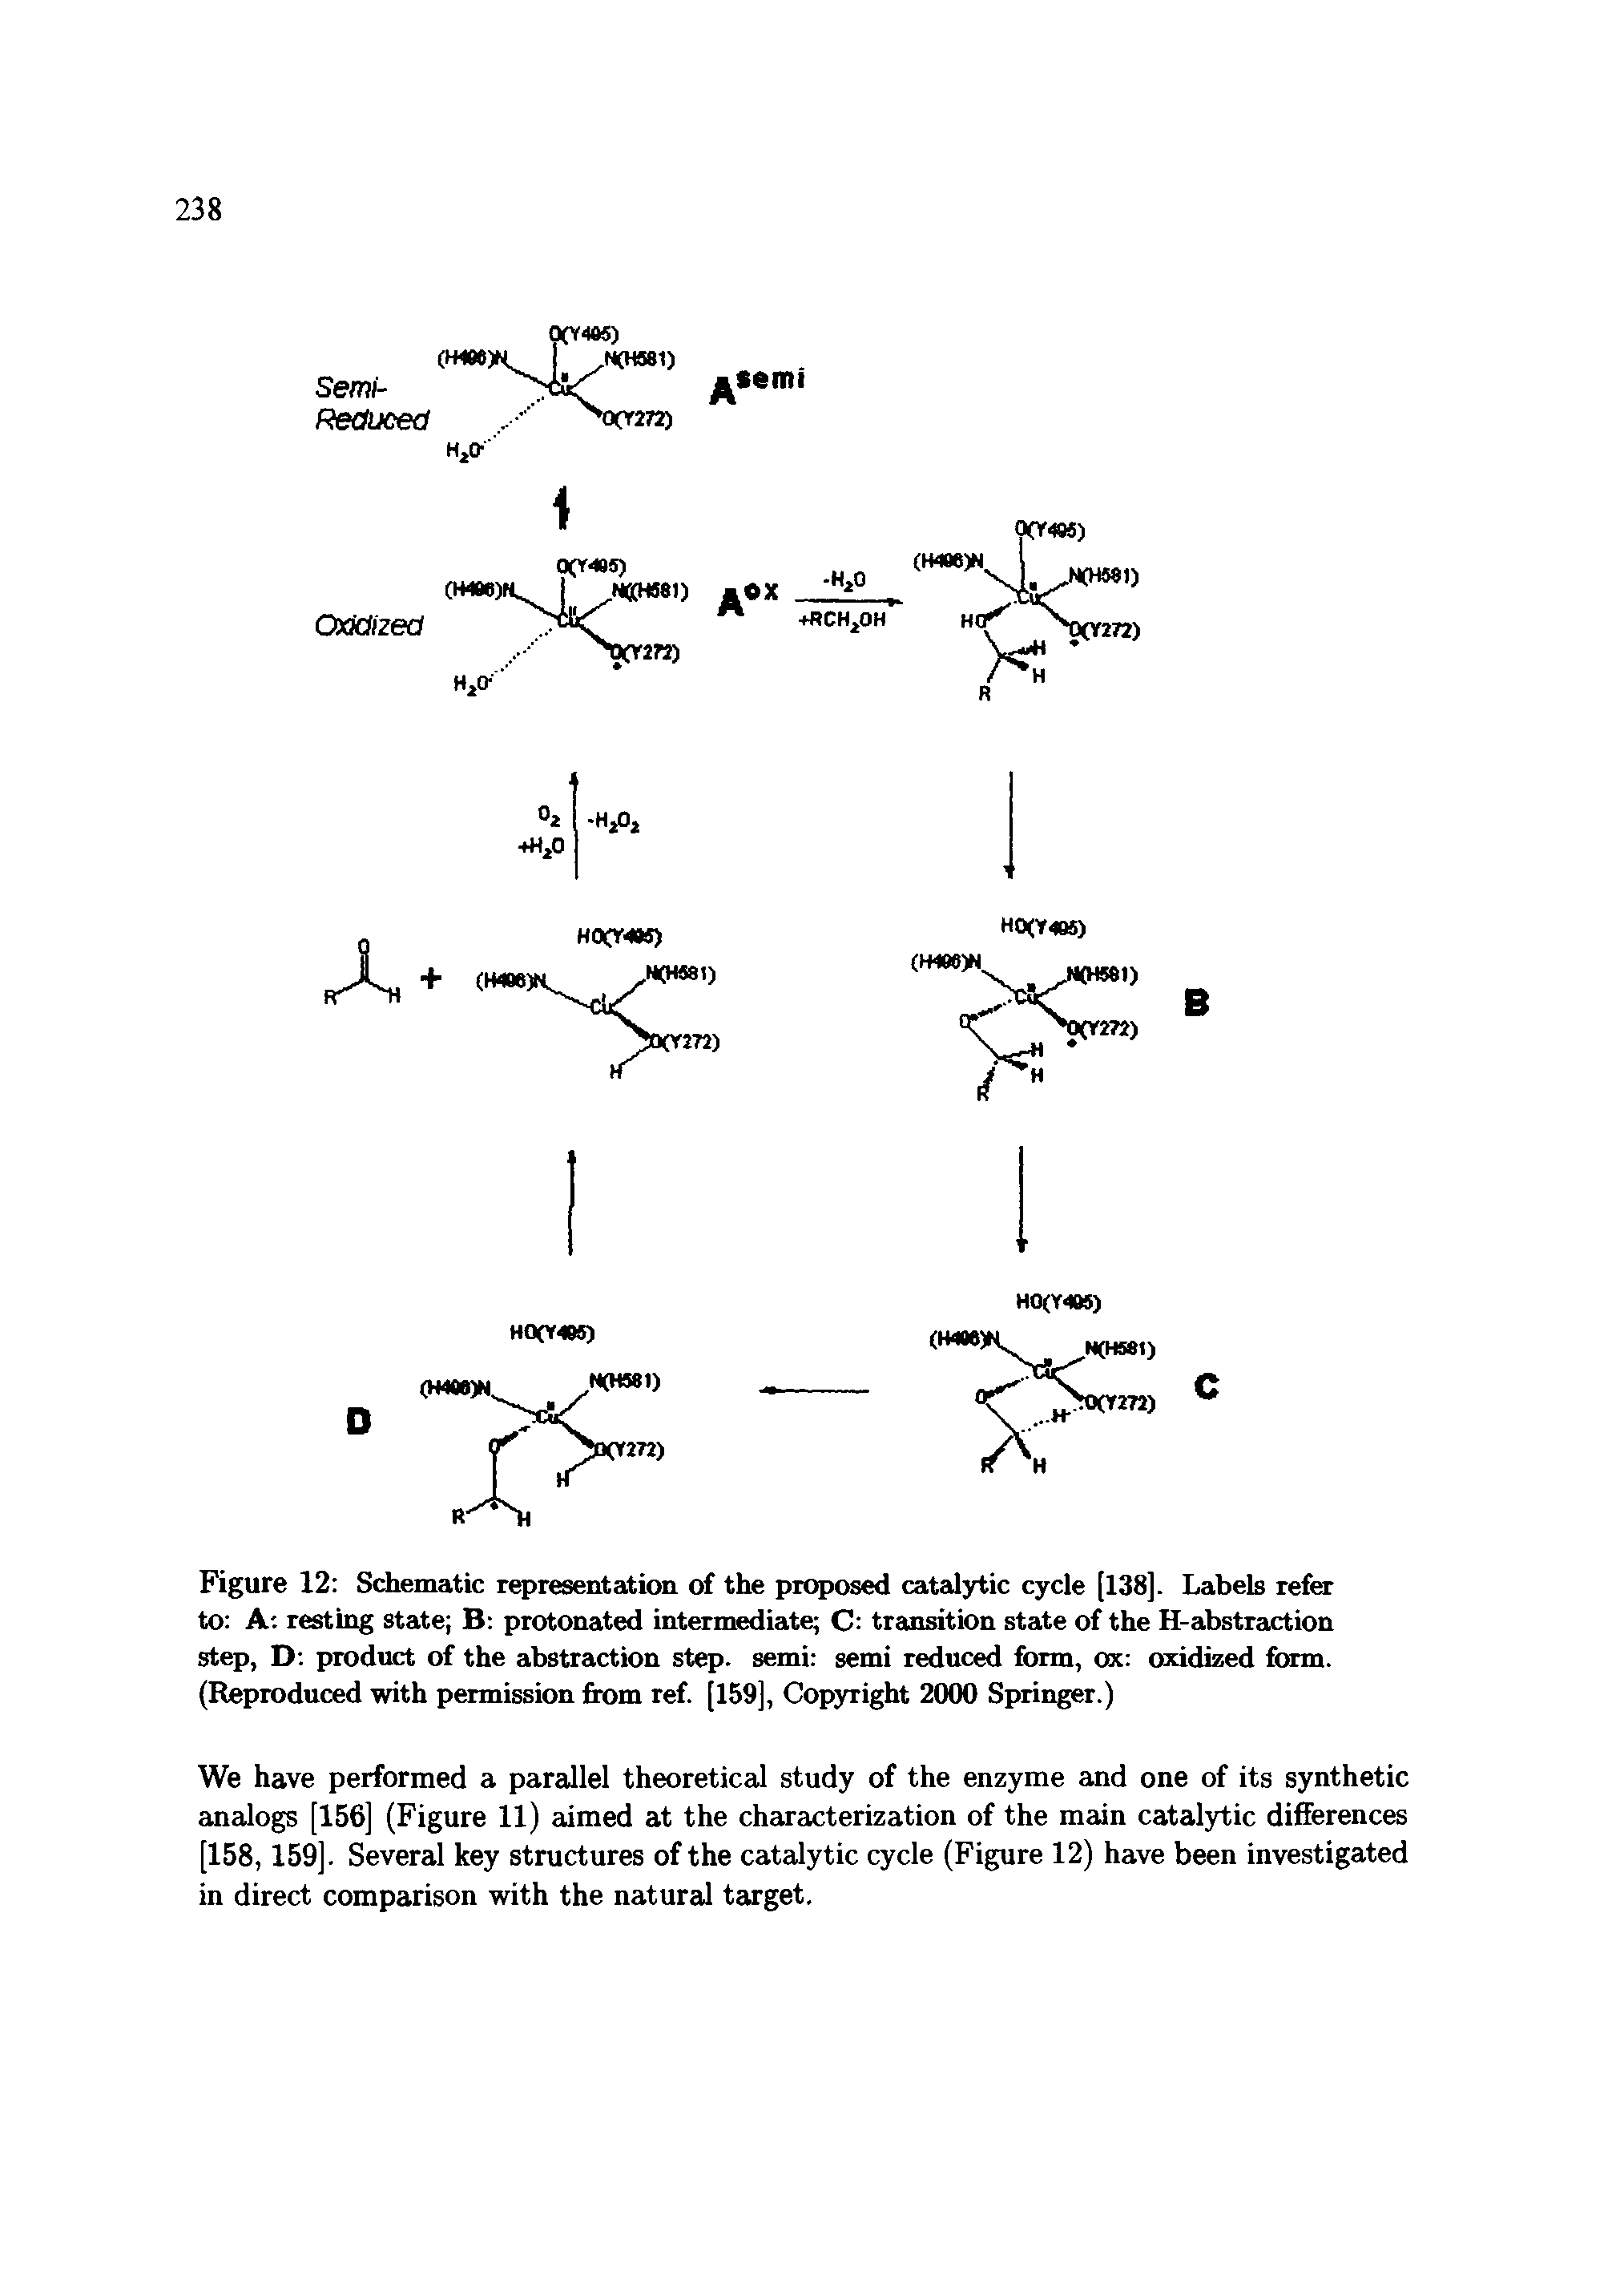 Figure 12 Schematic representation of the proposed cat2dytic cycle [138]. Labels refer to A resting state B protonated intermediate C transition state of the H-abstraction step, D product of the abstraction step, semi semi reduced form, ox oxidized form. (Reproduced with permission fix>m ref [159], Copyright 2000 Springer.)...